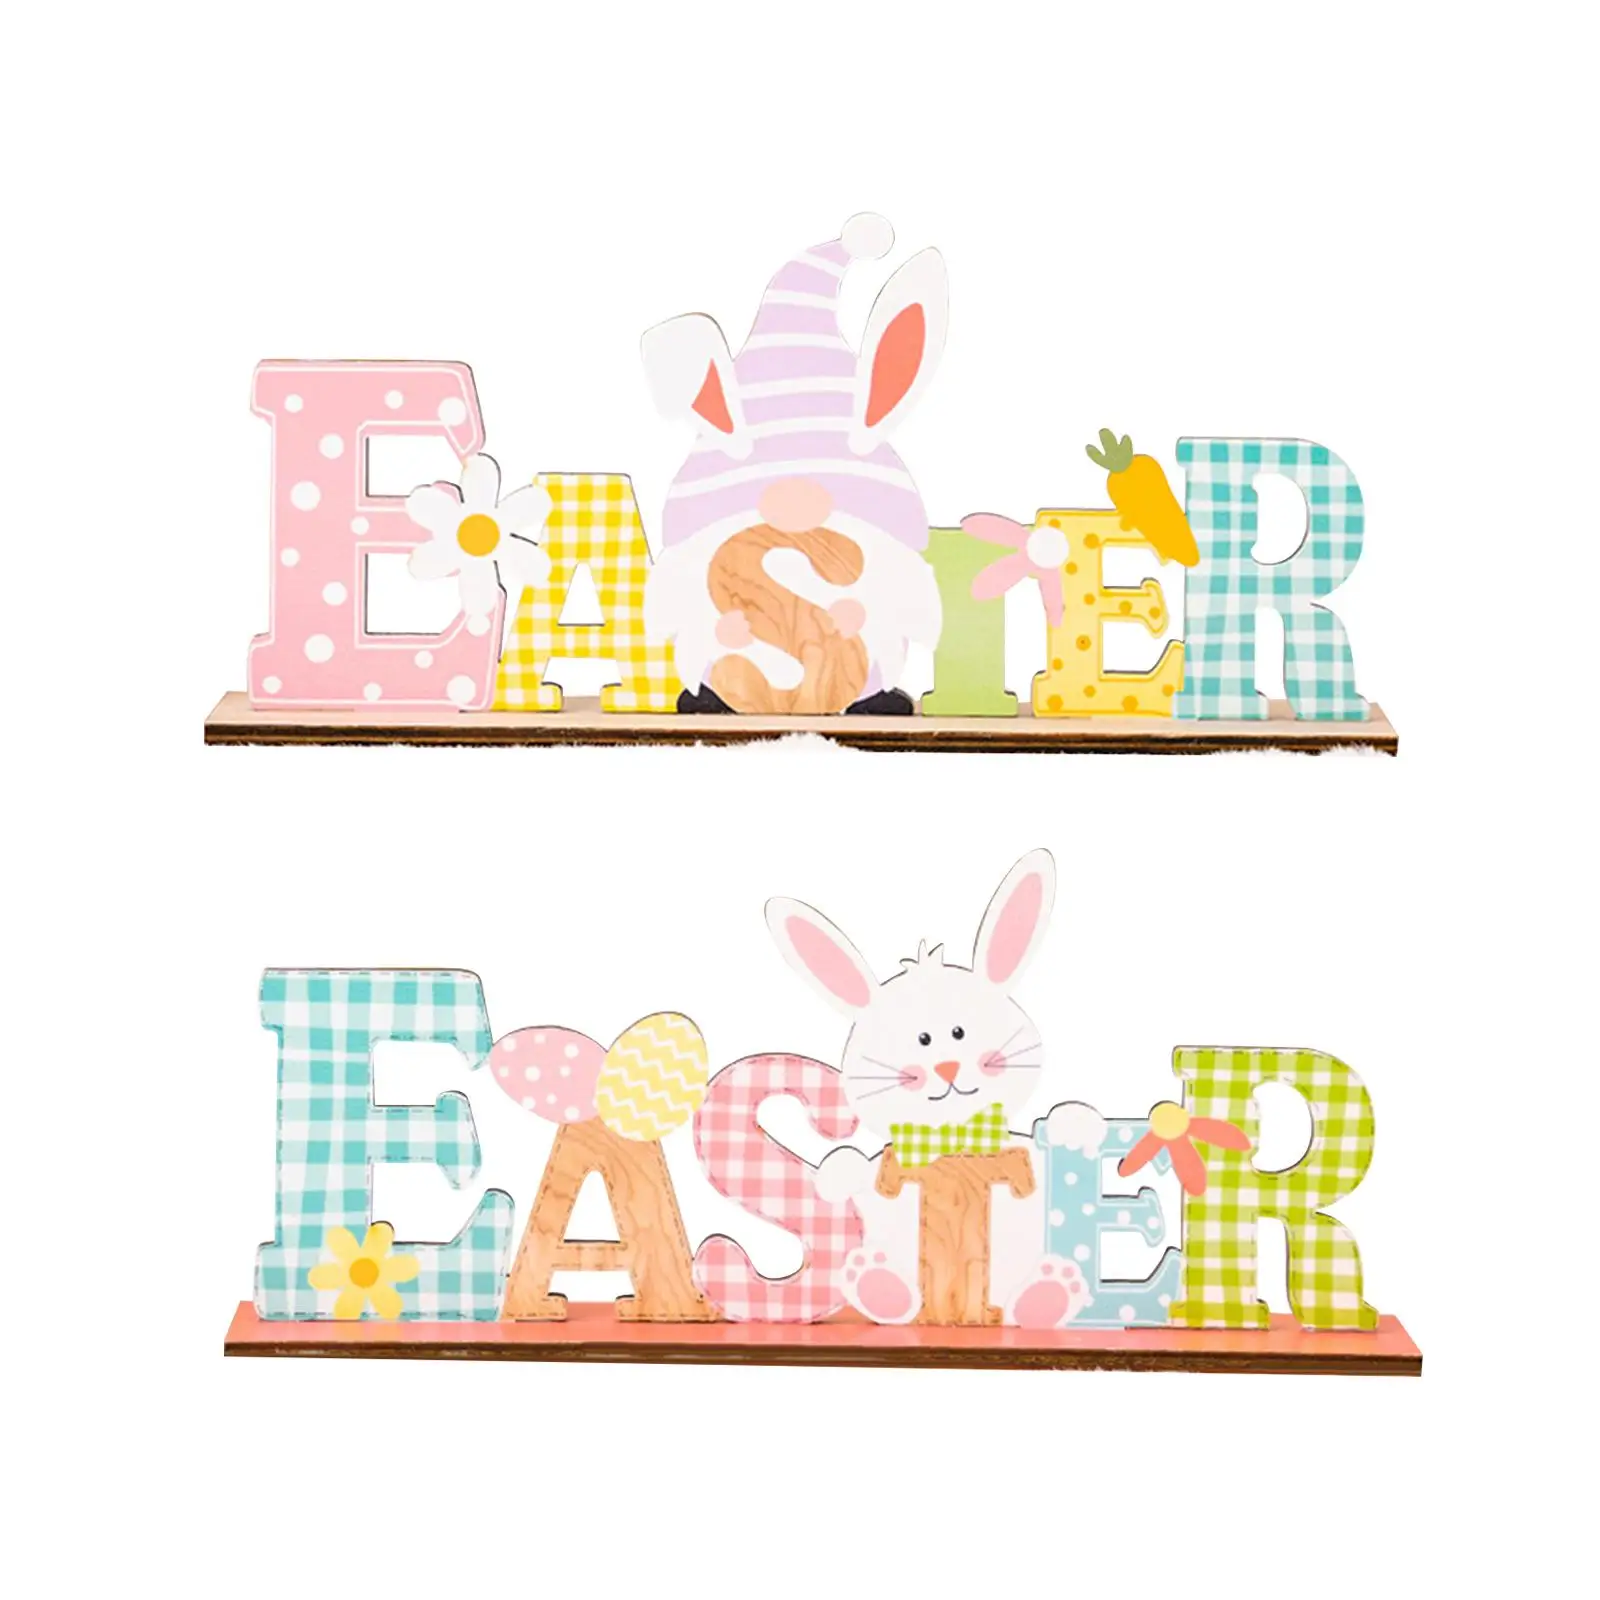 2x Wood Happy Easter Decorations Tabletop Signs Gnome Bunny Egg Spring Decor Table Centerpiece Gift for Office Home Garden Lawn